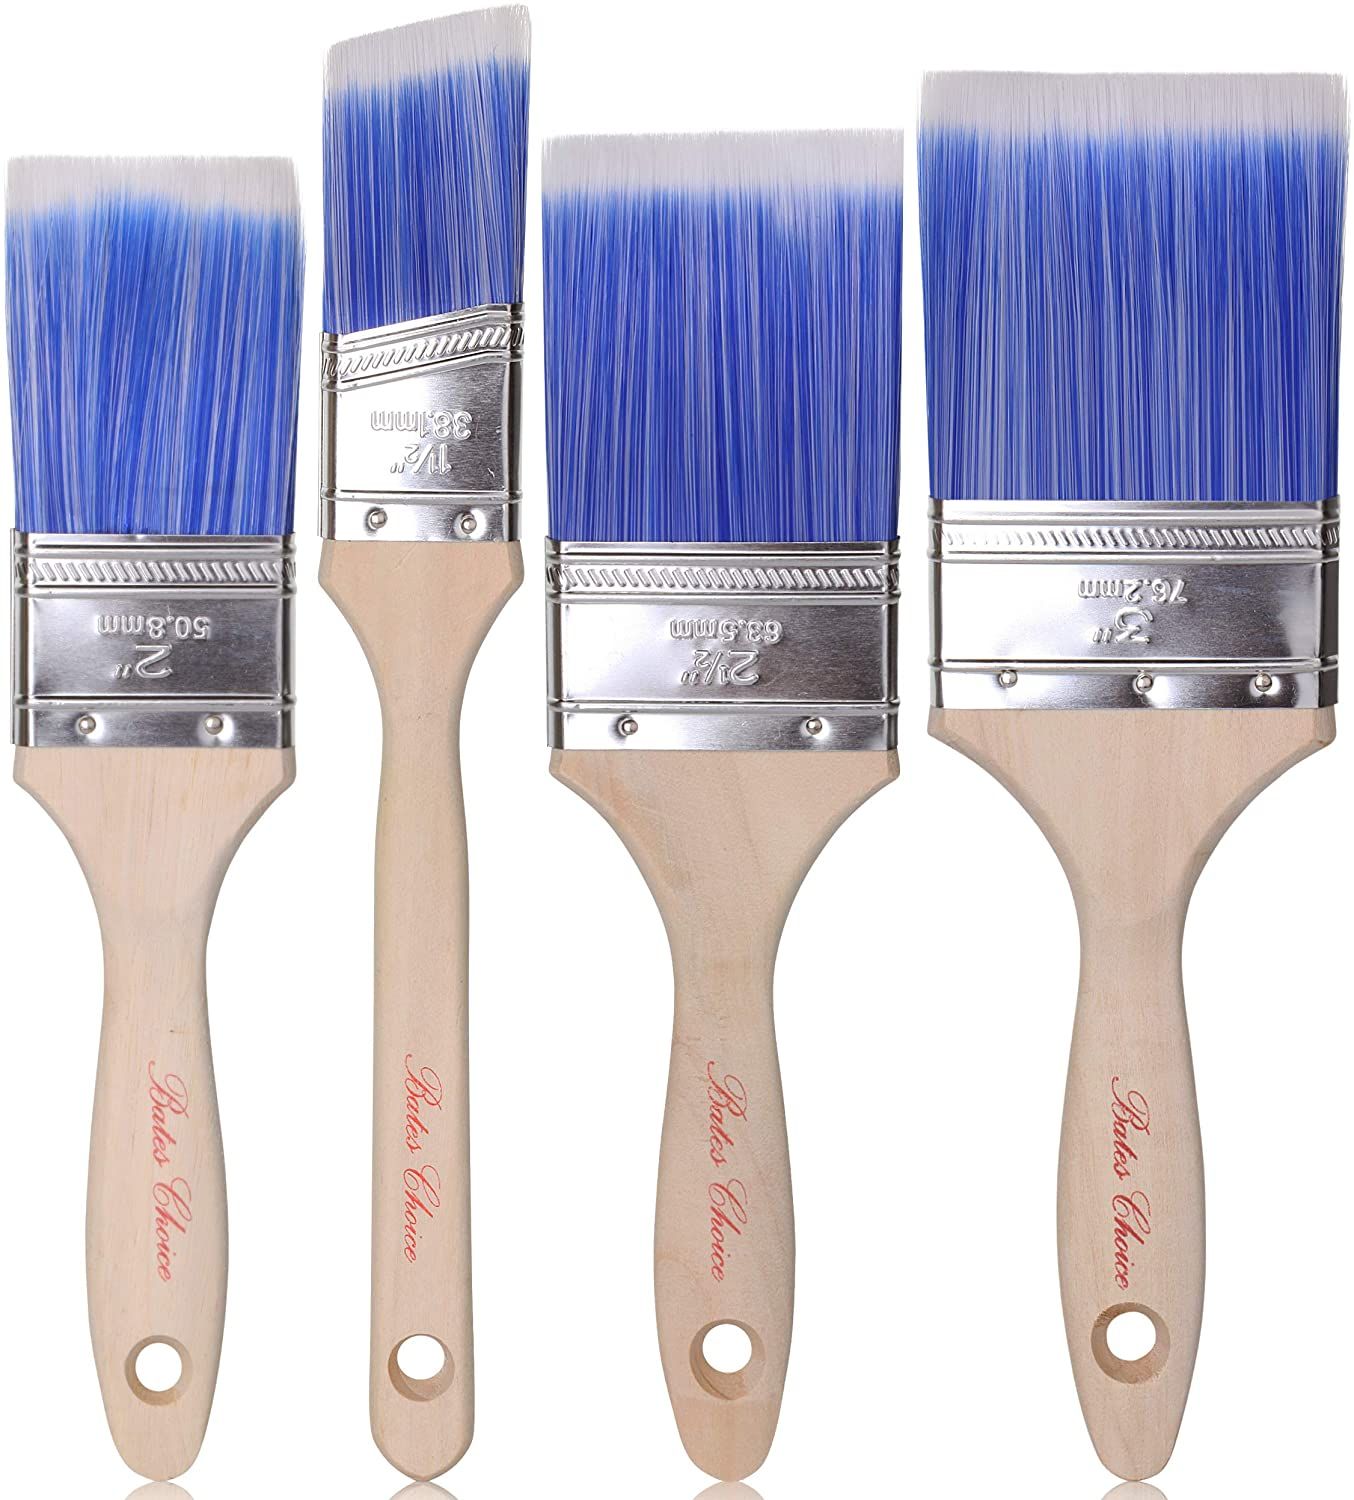 7 Best Flat Paintbrushes for Walls + Tips for Painting with Them